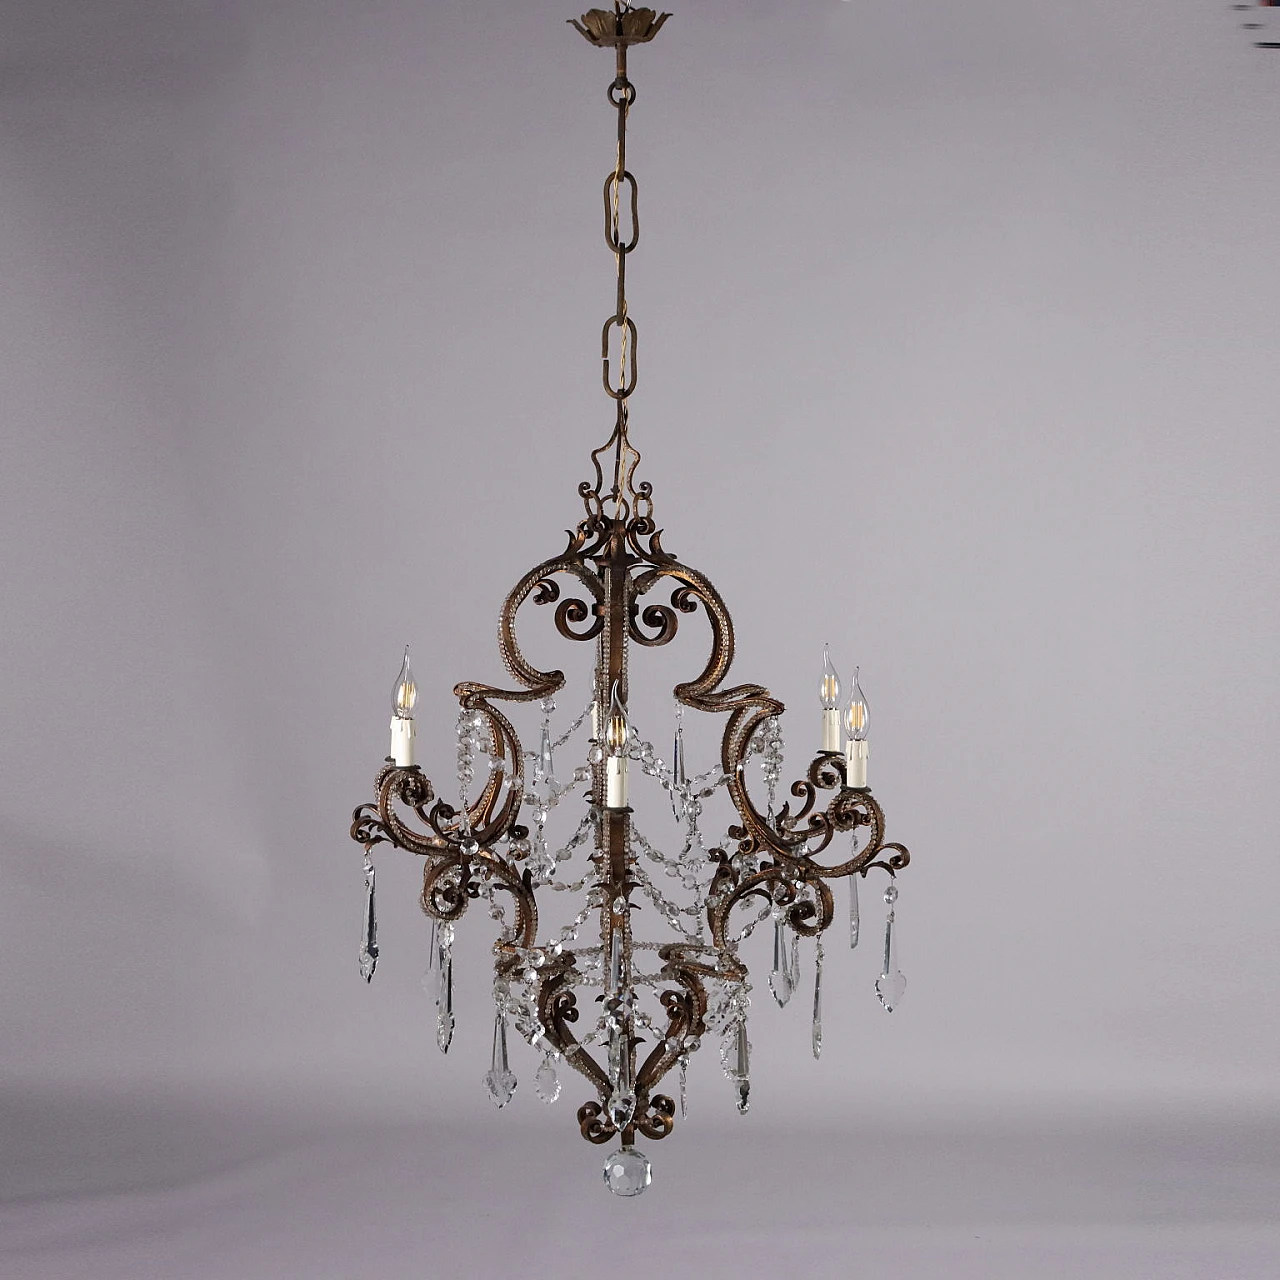 Six-light gilded wrought iron & glass chandelier, 19th century 9